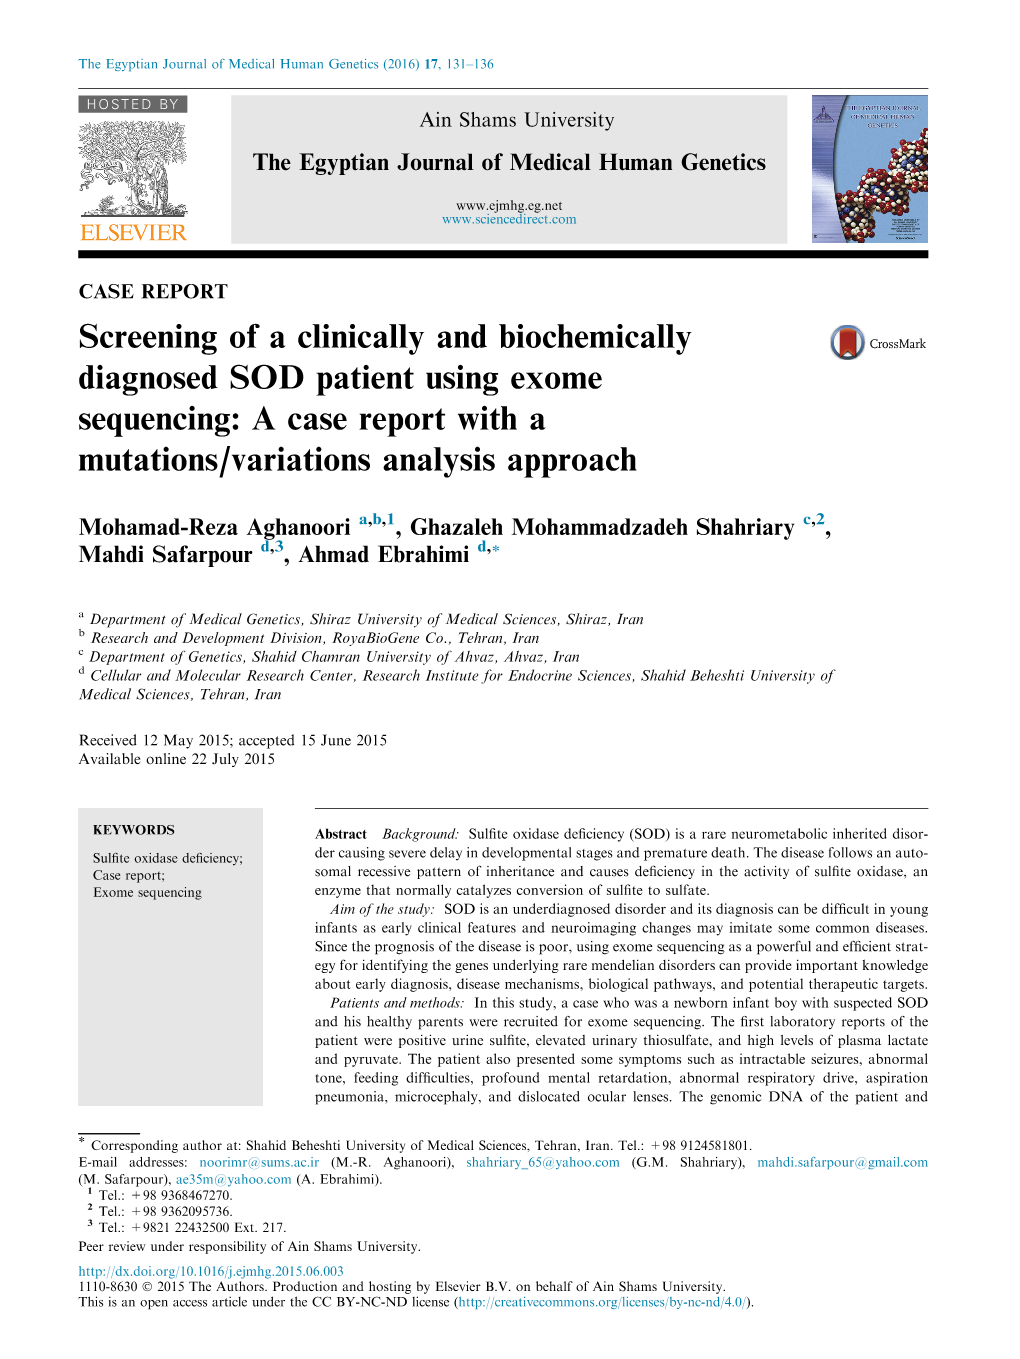 Screening of a Clinically and Biochemically Diagnosed SOD Patient Using Exome Sequencing: a Case Report with a Mutations/Variations Analysis Approach